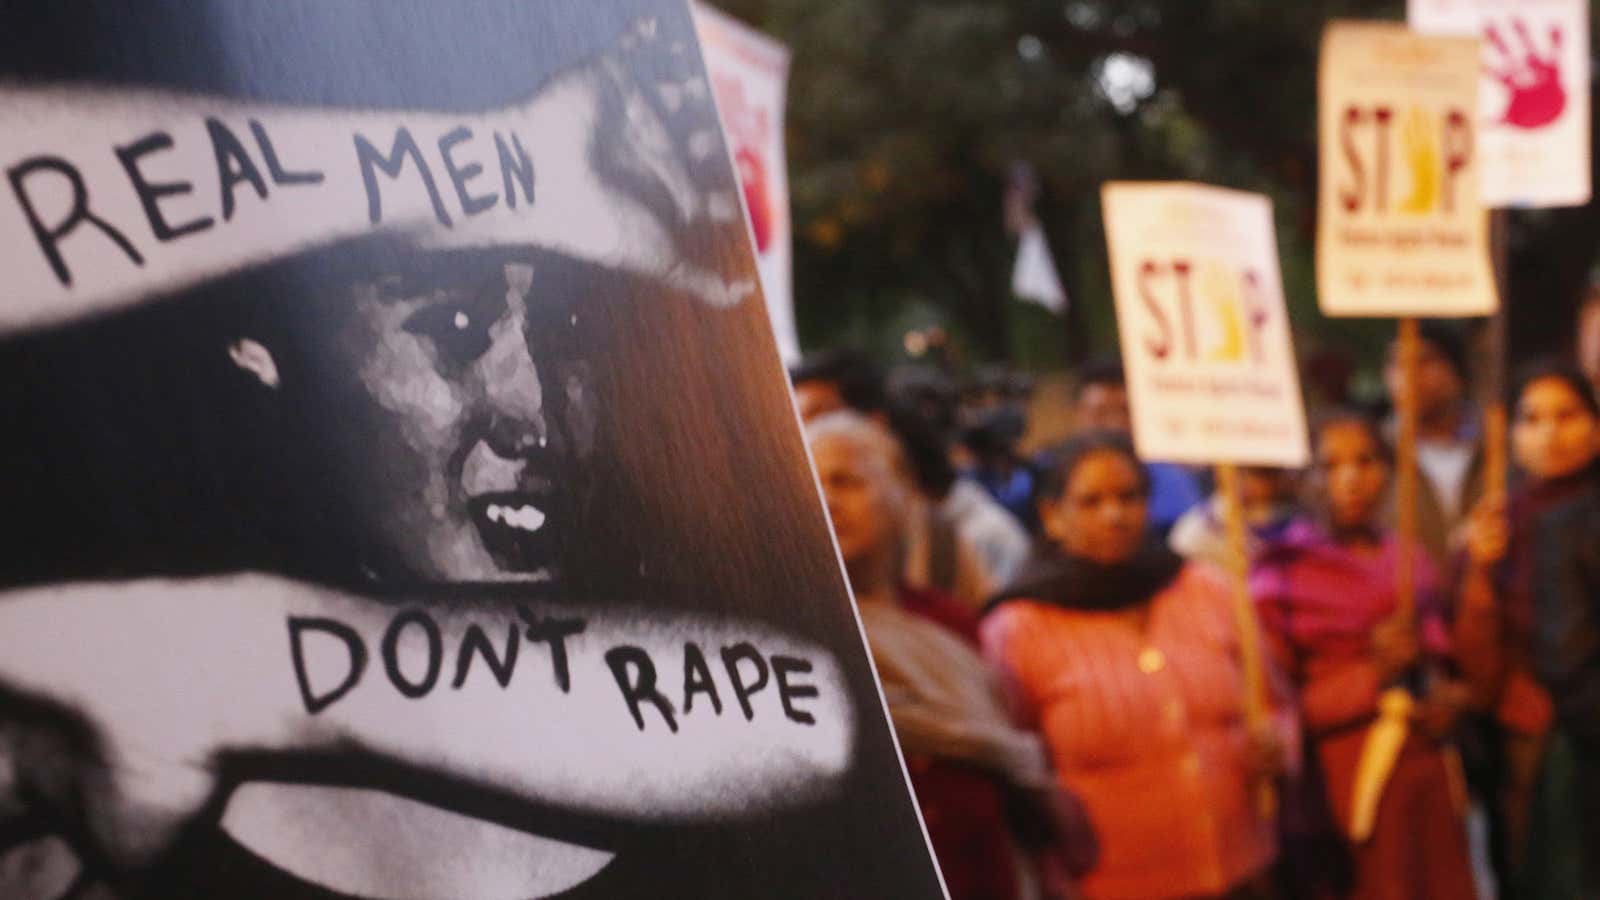 The more important discussion on rape has died.